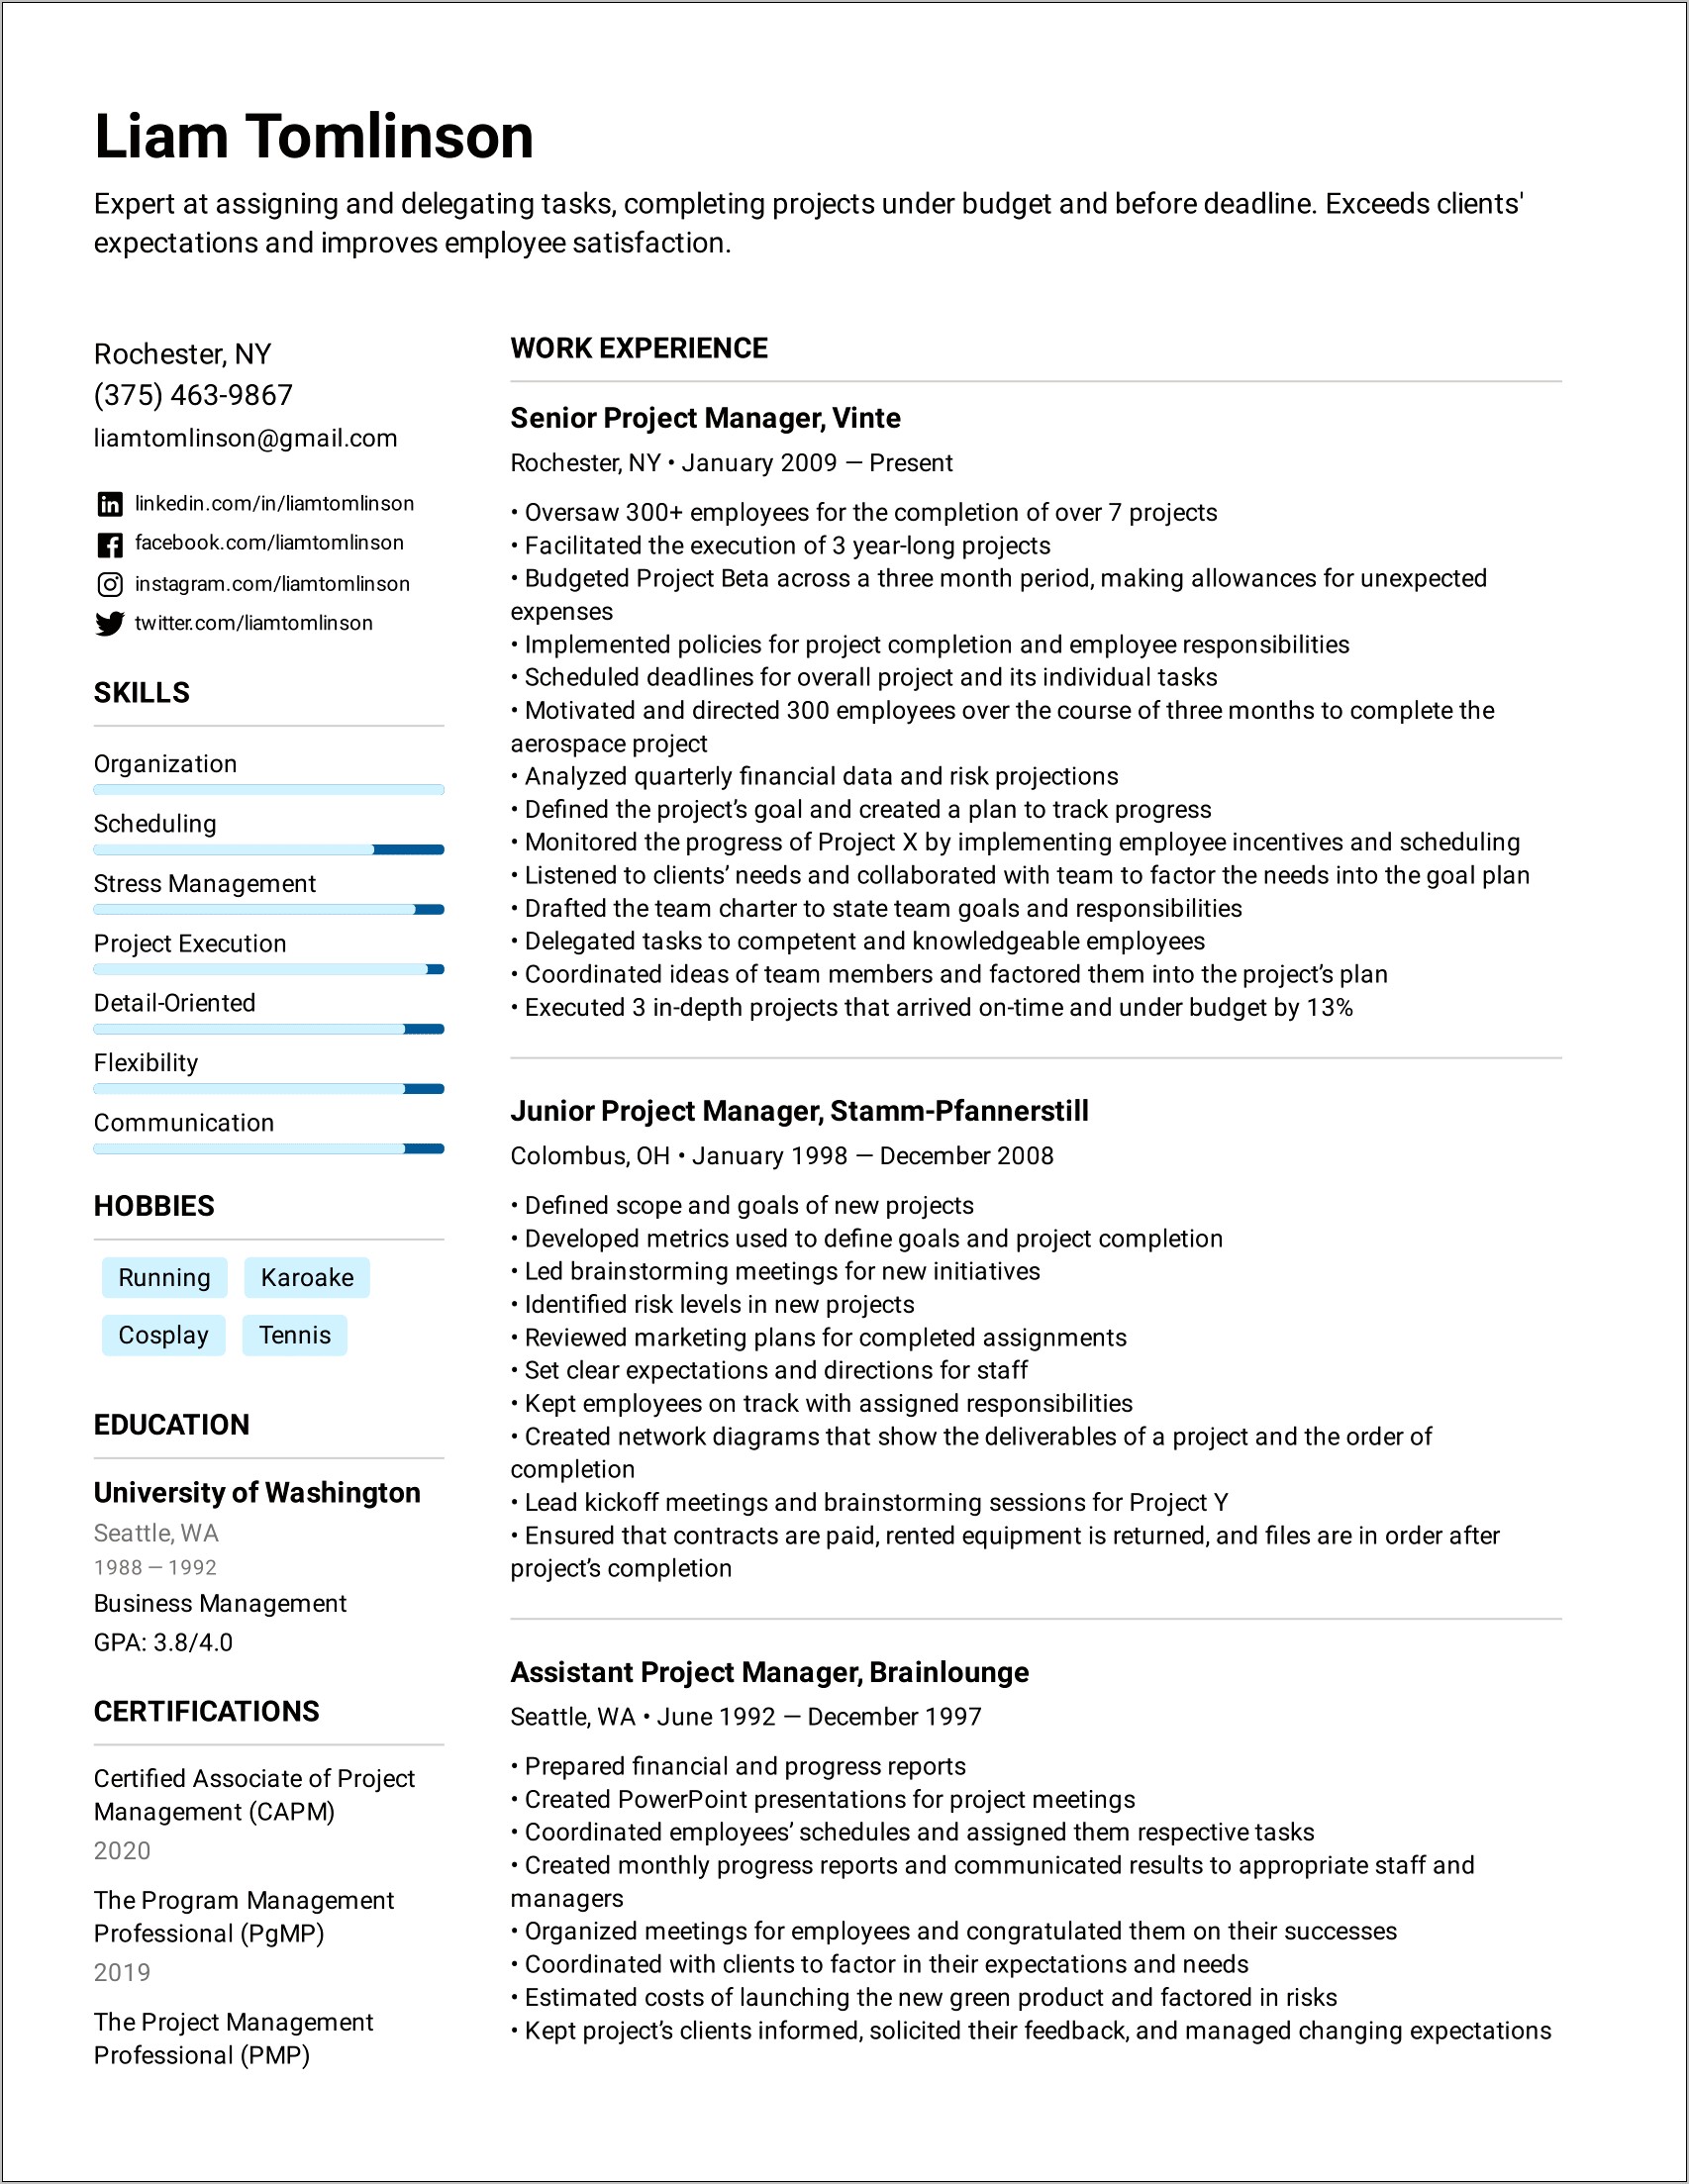 Resume Summary Or Objective Statement